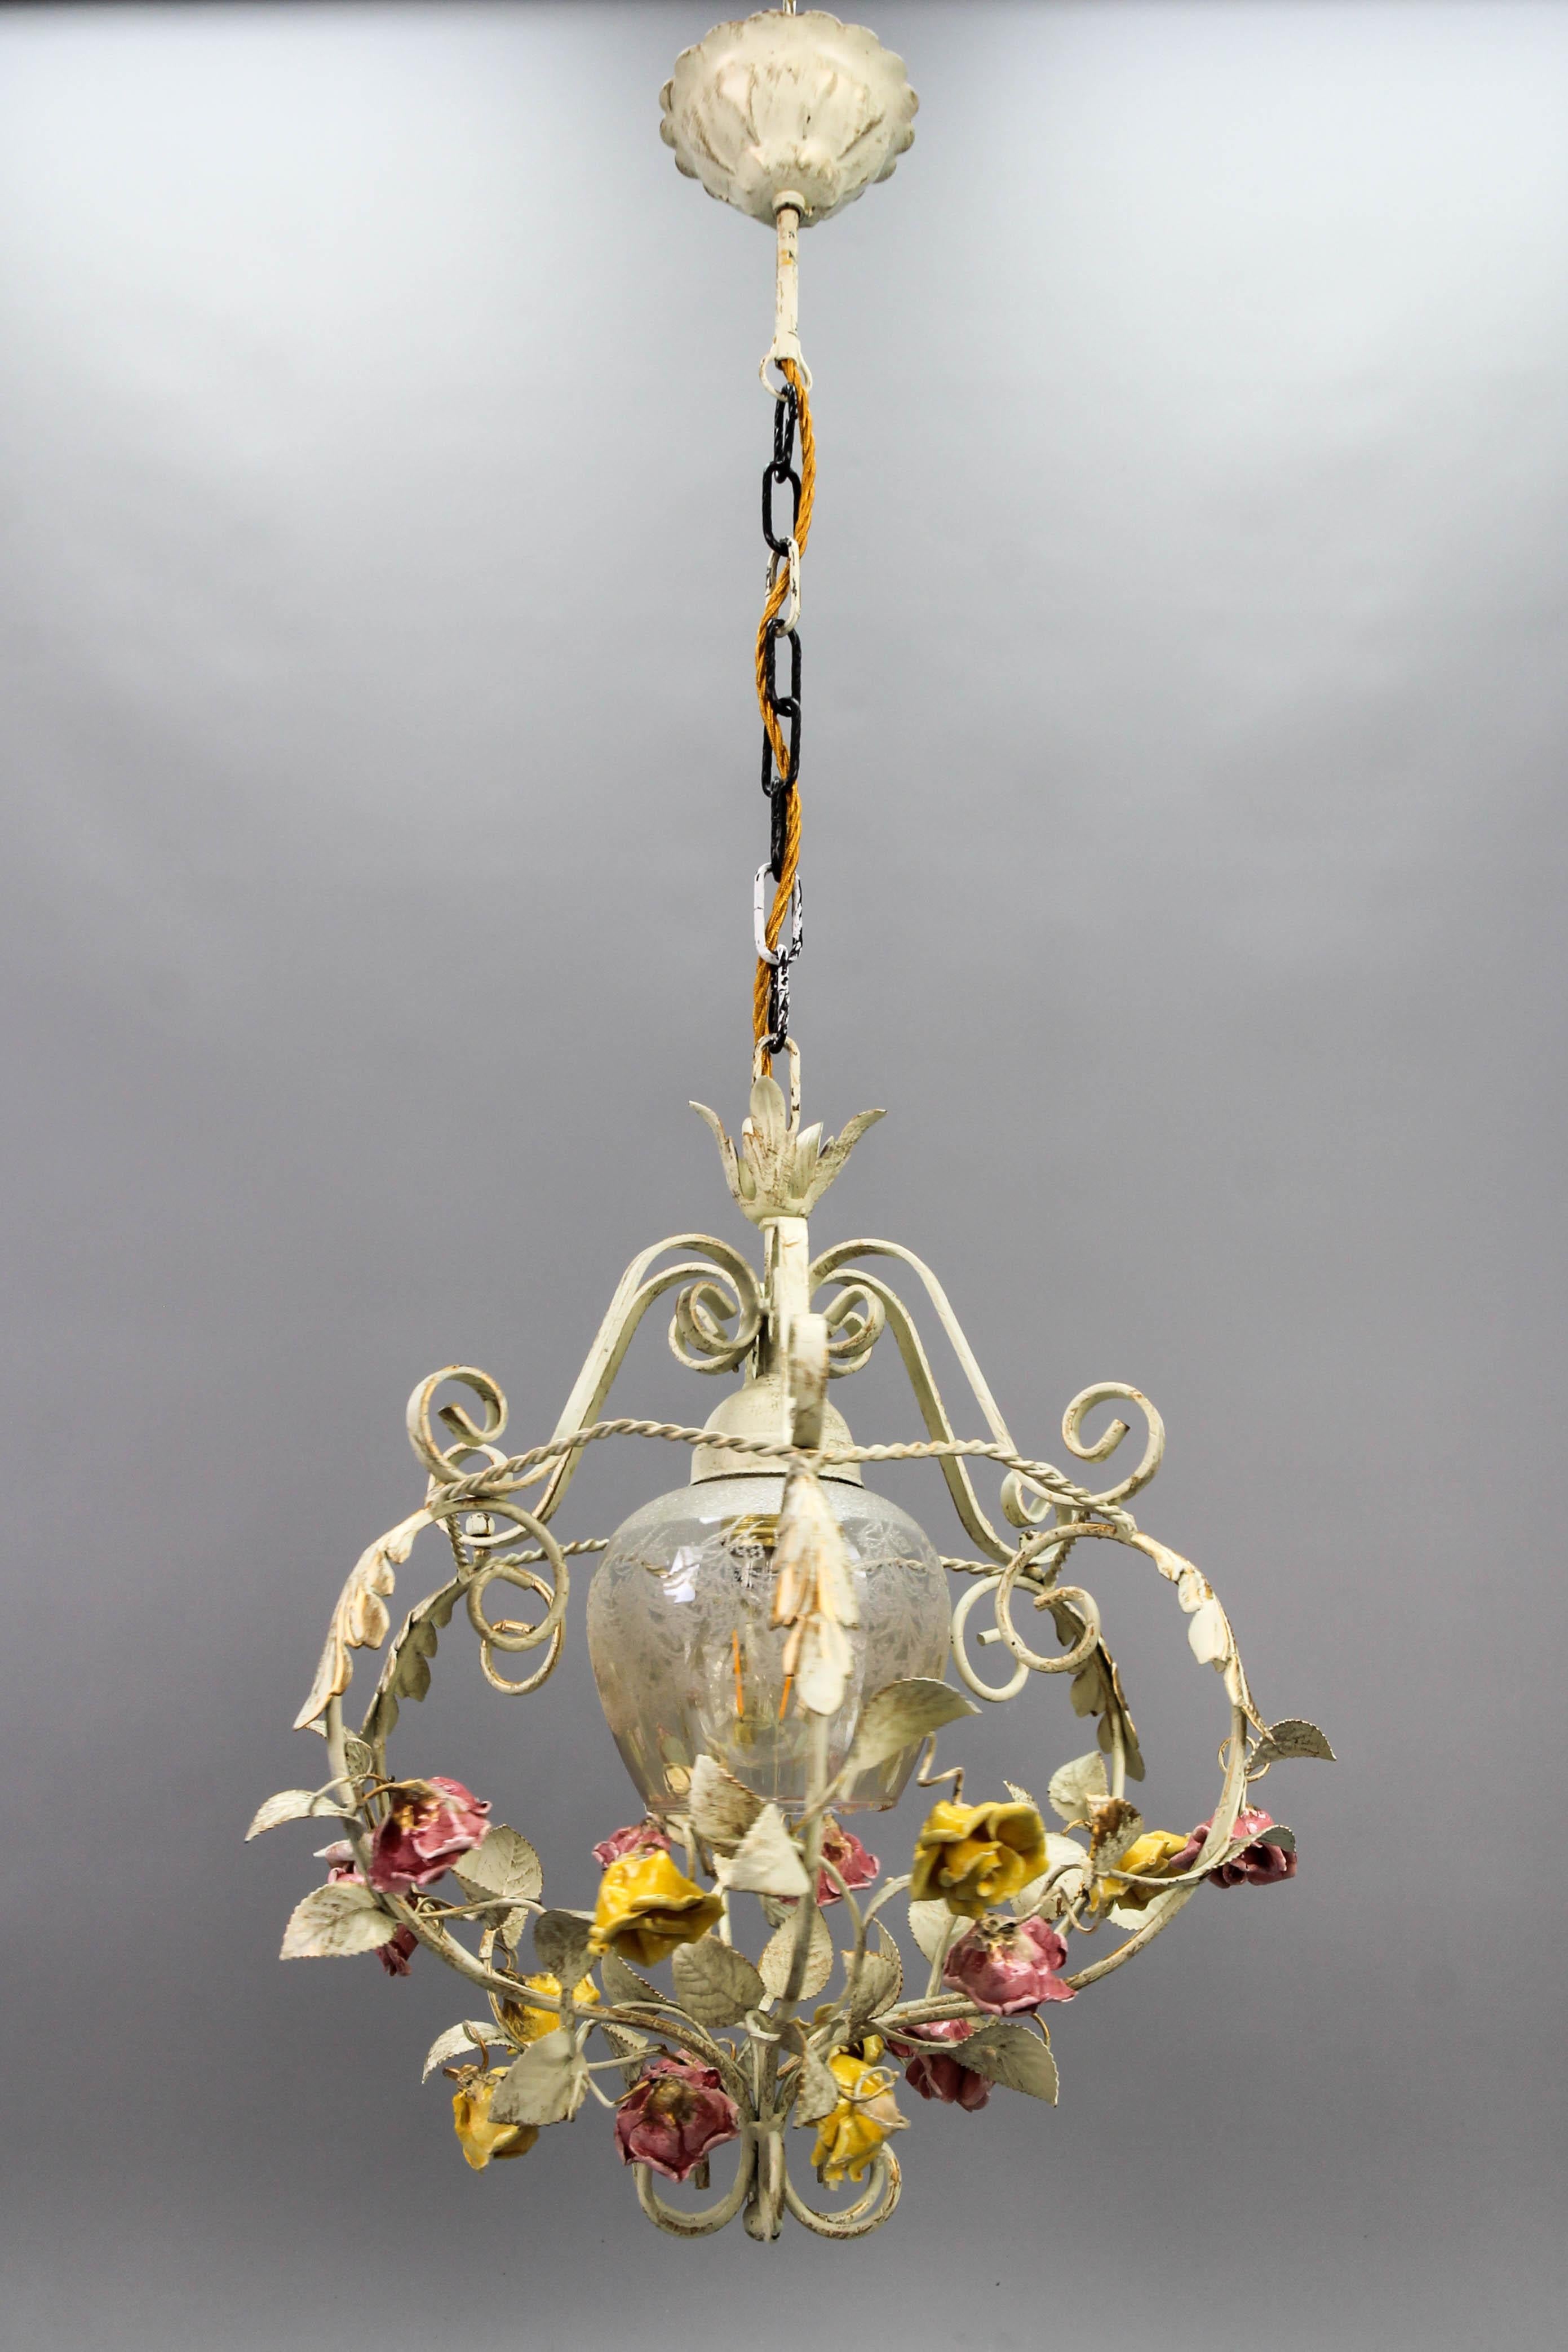 Hollywood Regency Style Metal and Glass Chandelier with Porcelain Roses, 1970s For Sale 14